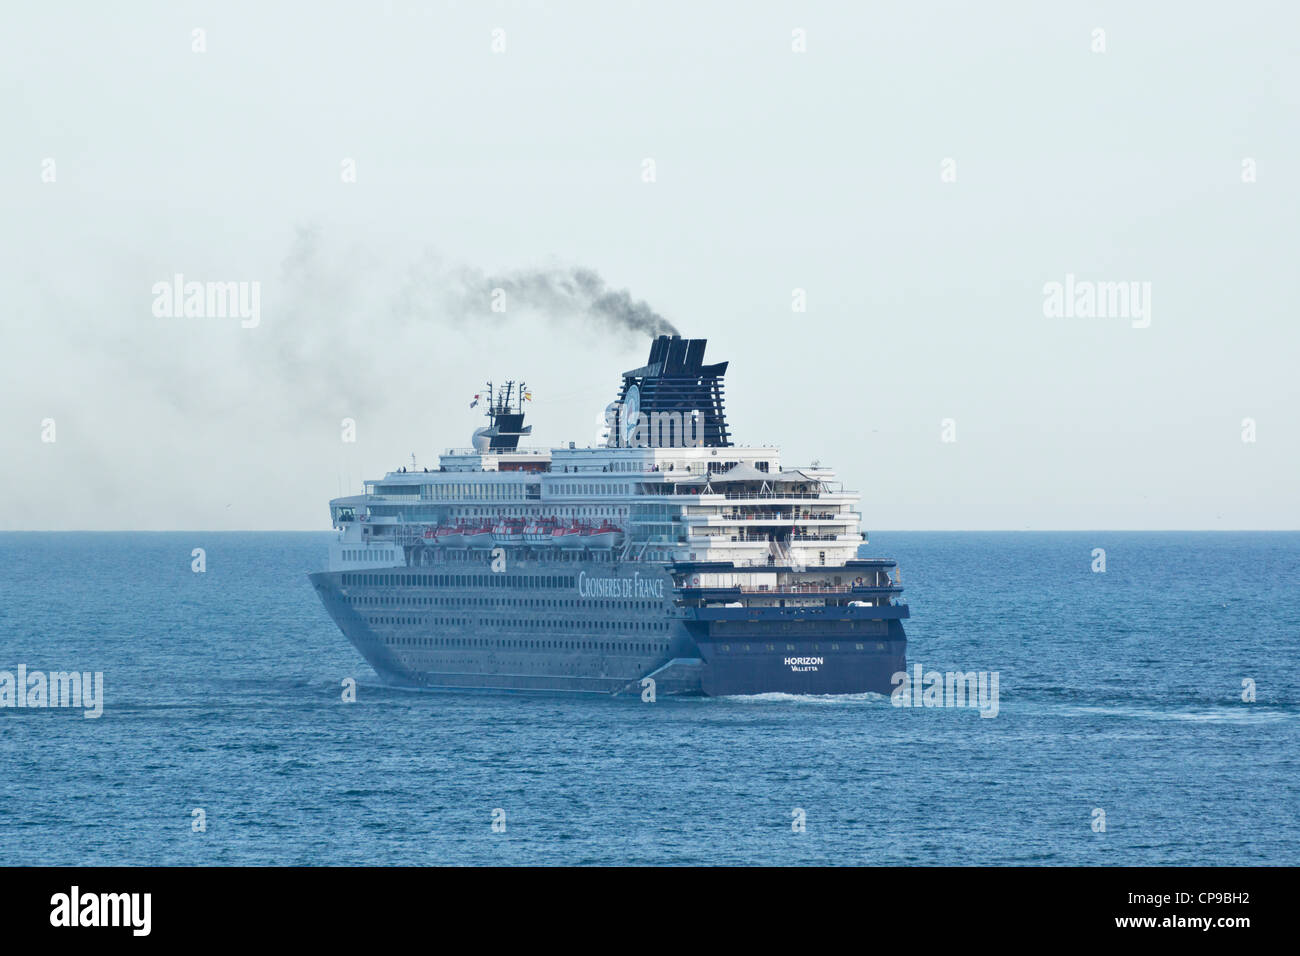 Barcelona - port. Croisieres de France cruise ship. The ship Horizon registered in Valletta, with dirty emissions from engines. Stock Photo